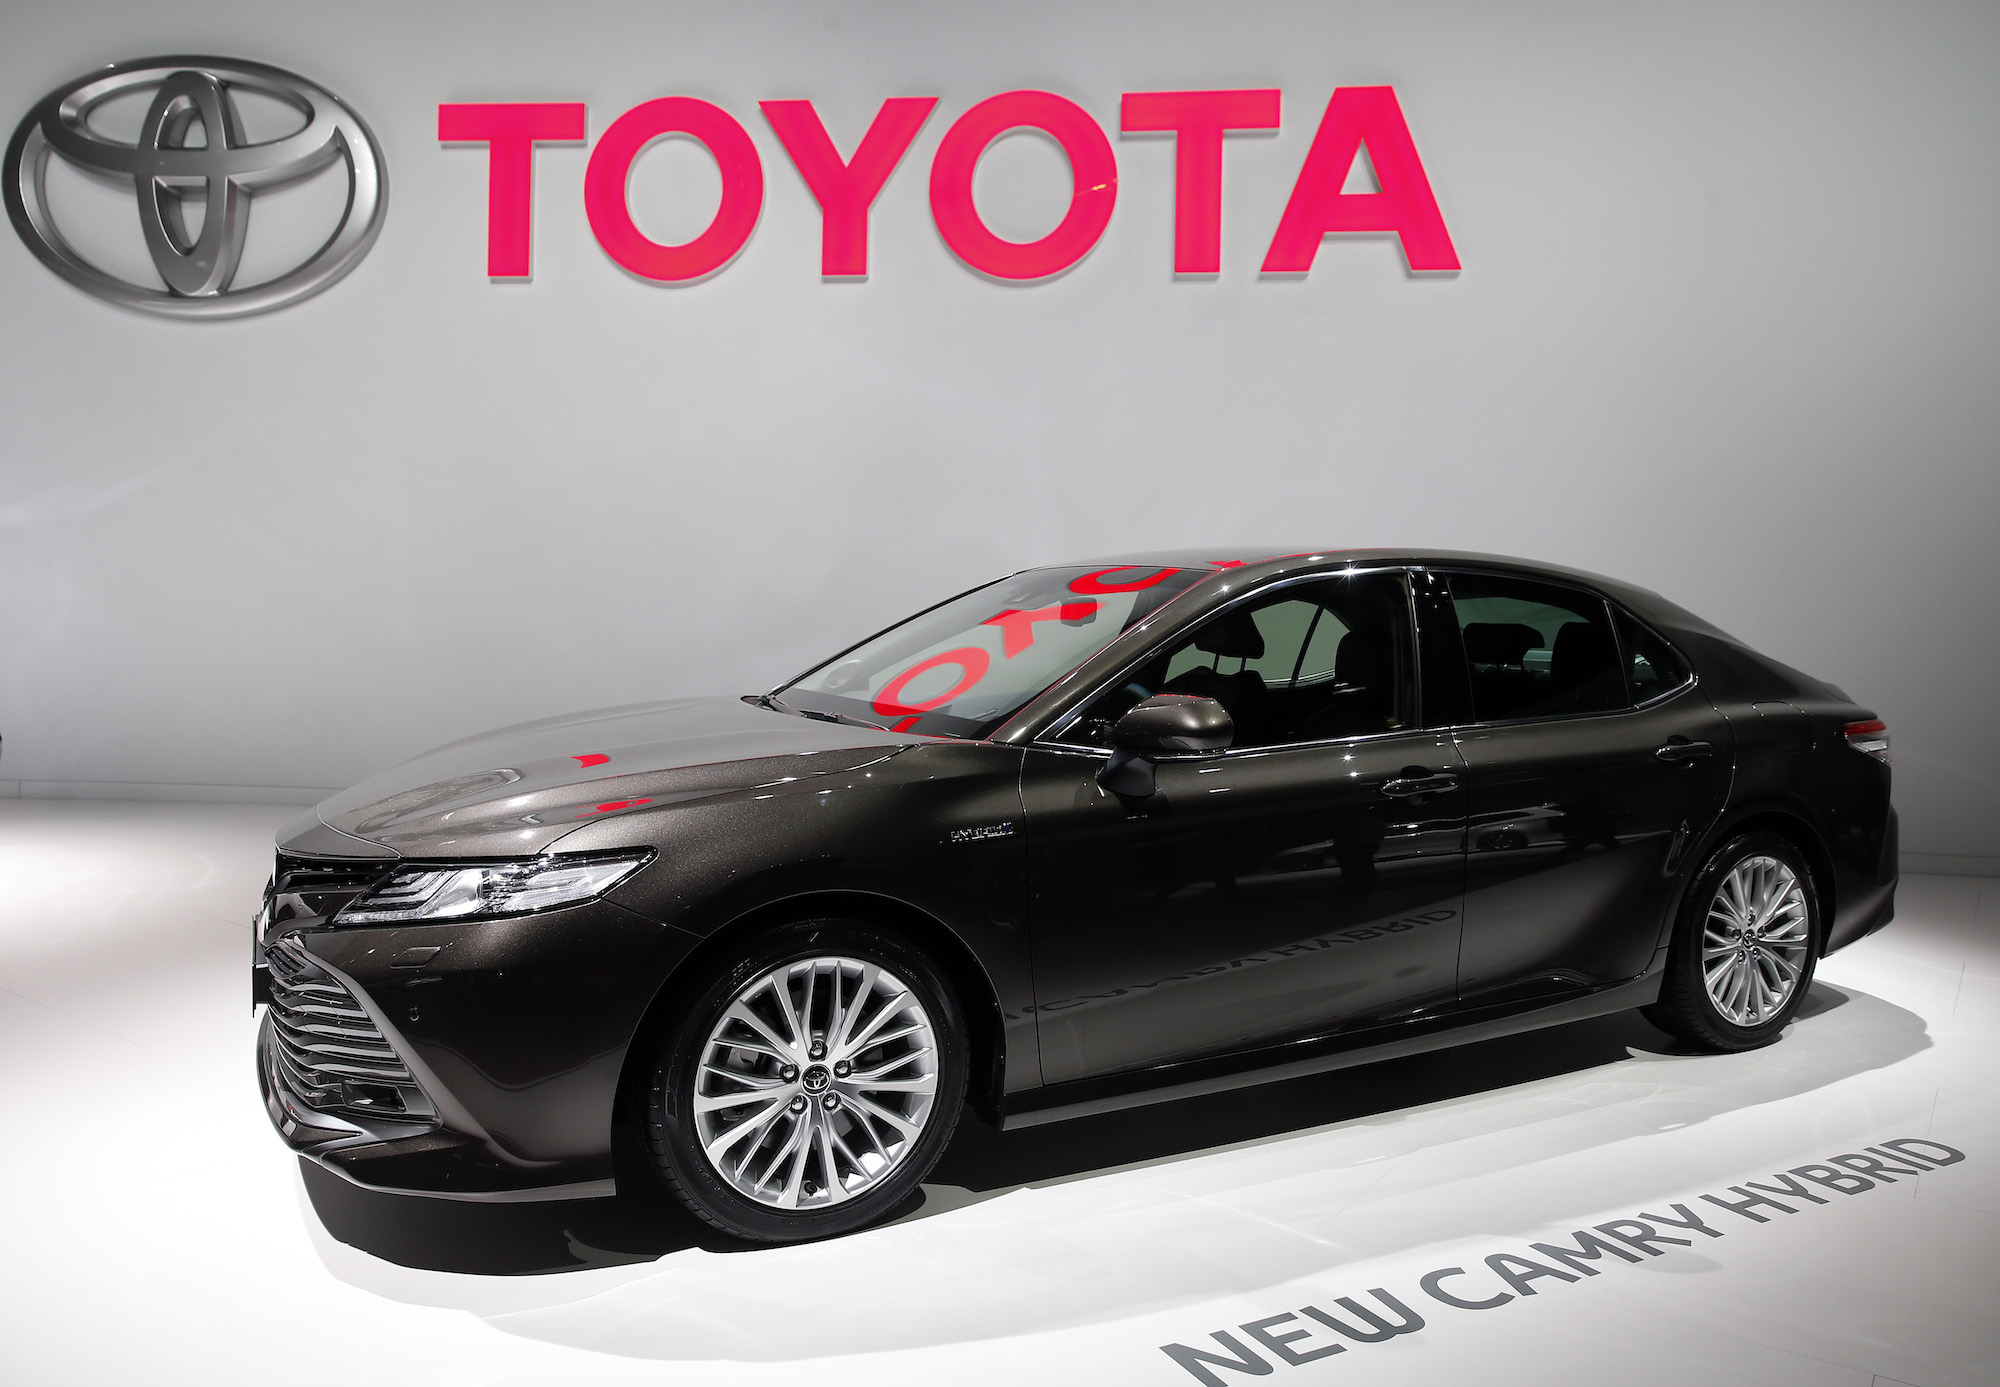 A black Toyota Camry Hybrid, which is one of the best Toyota cars for highway fuel economy.